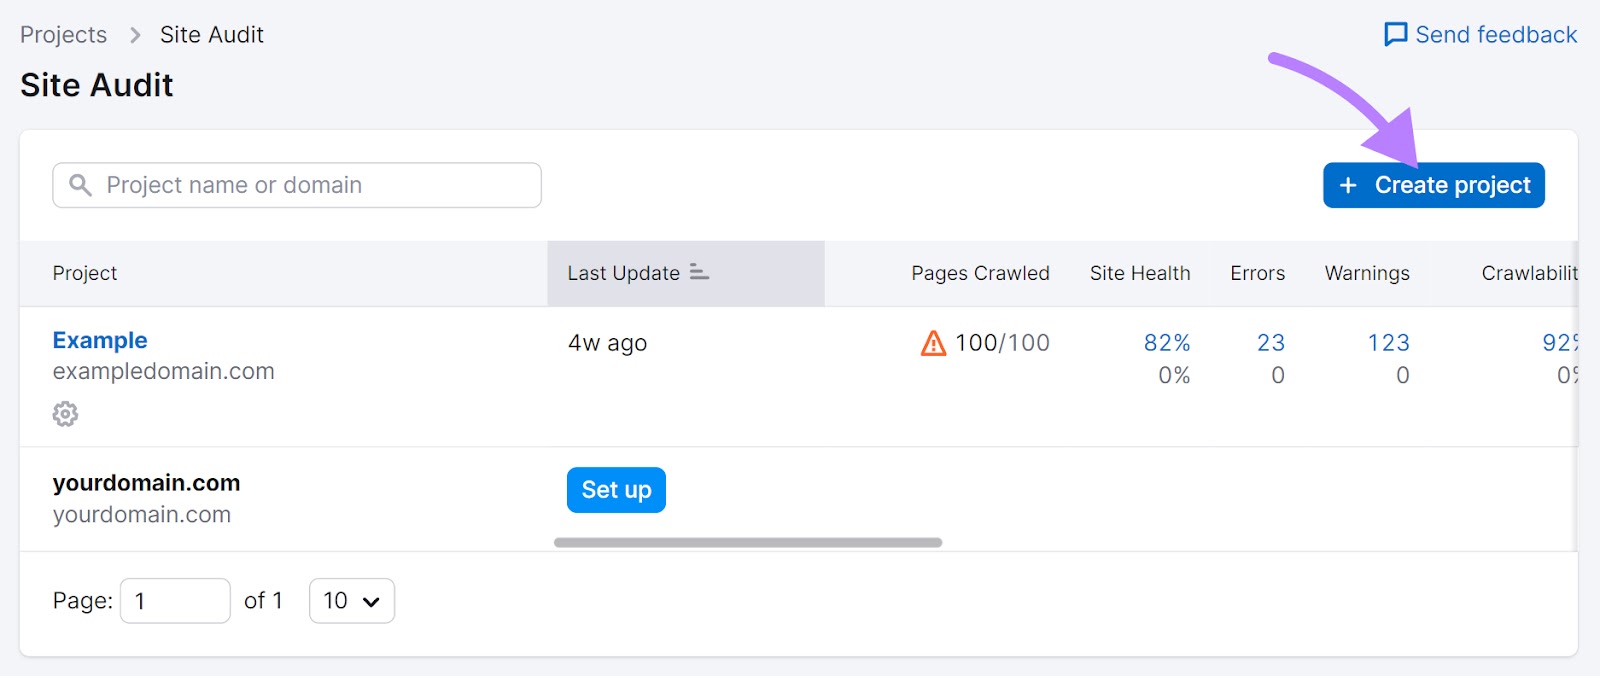 "+ Create project button" in Site Audit